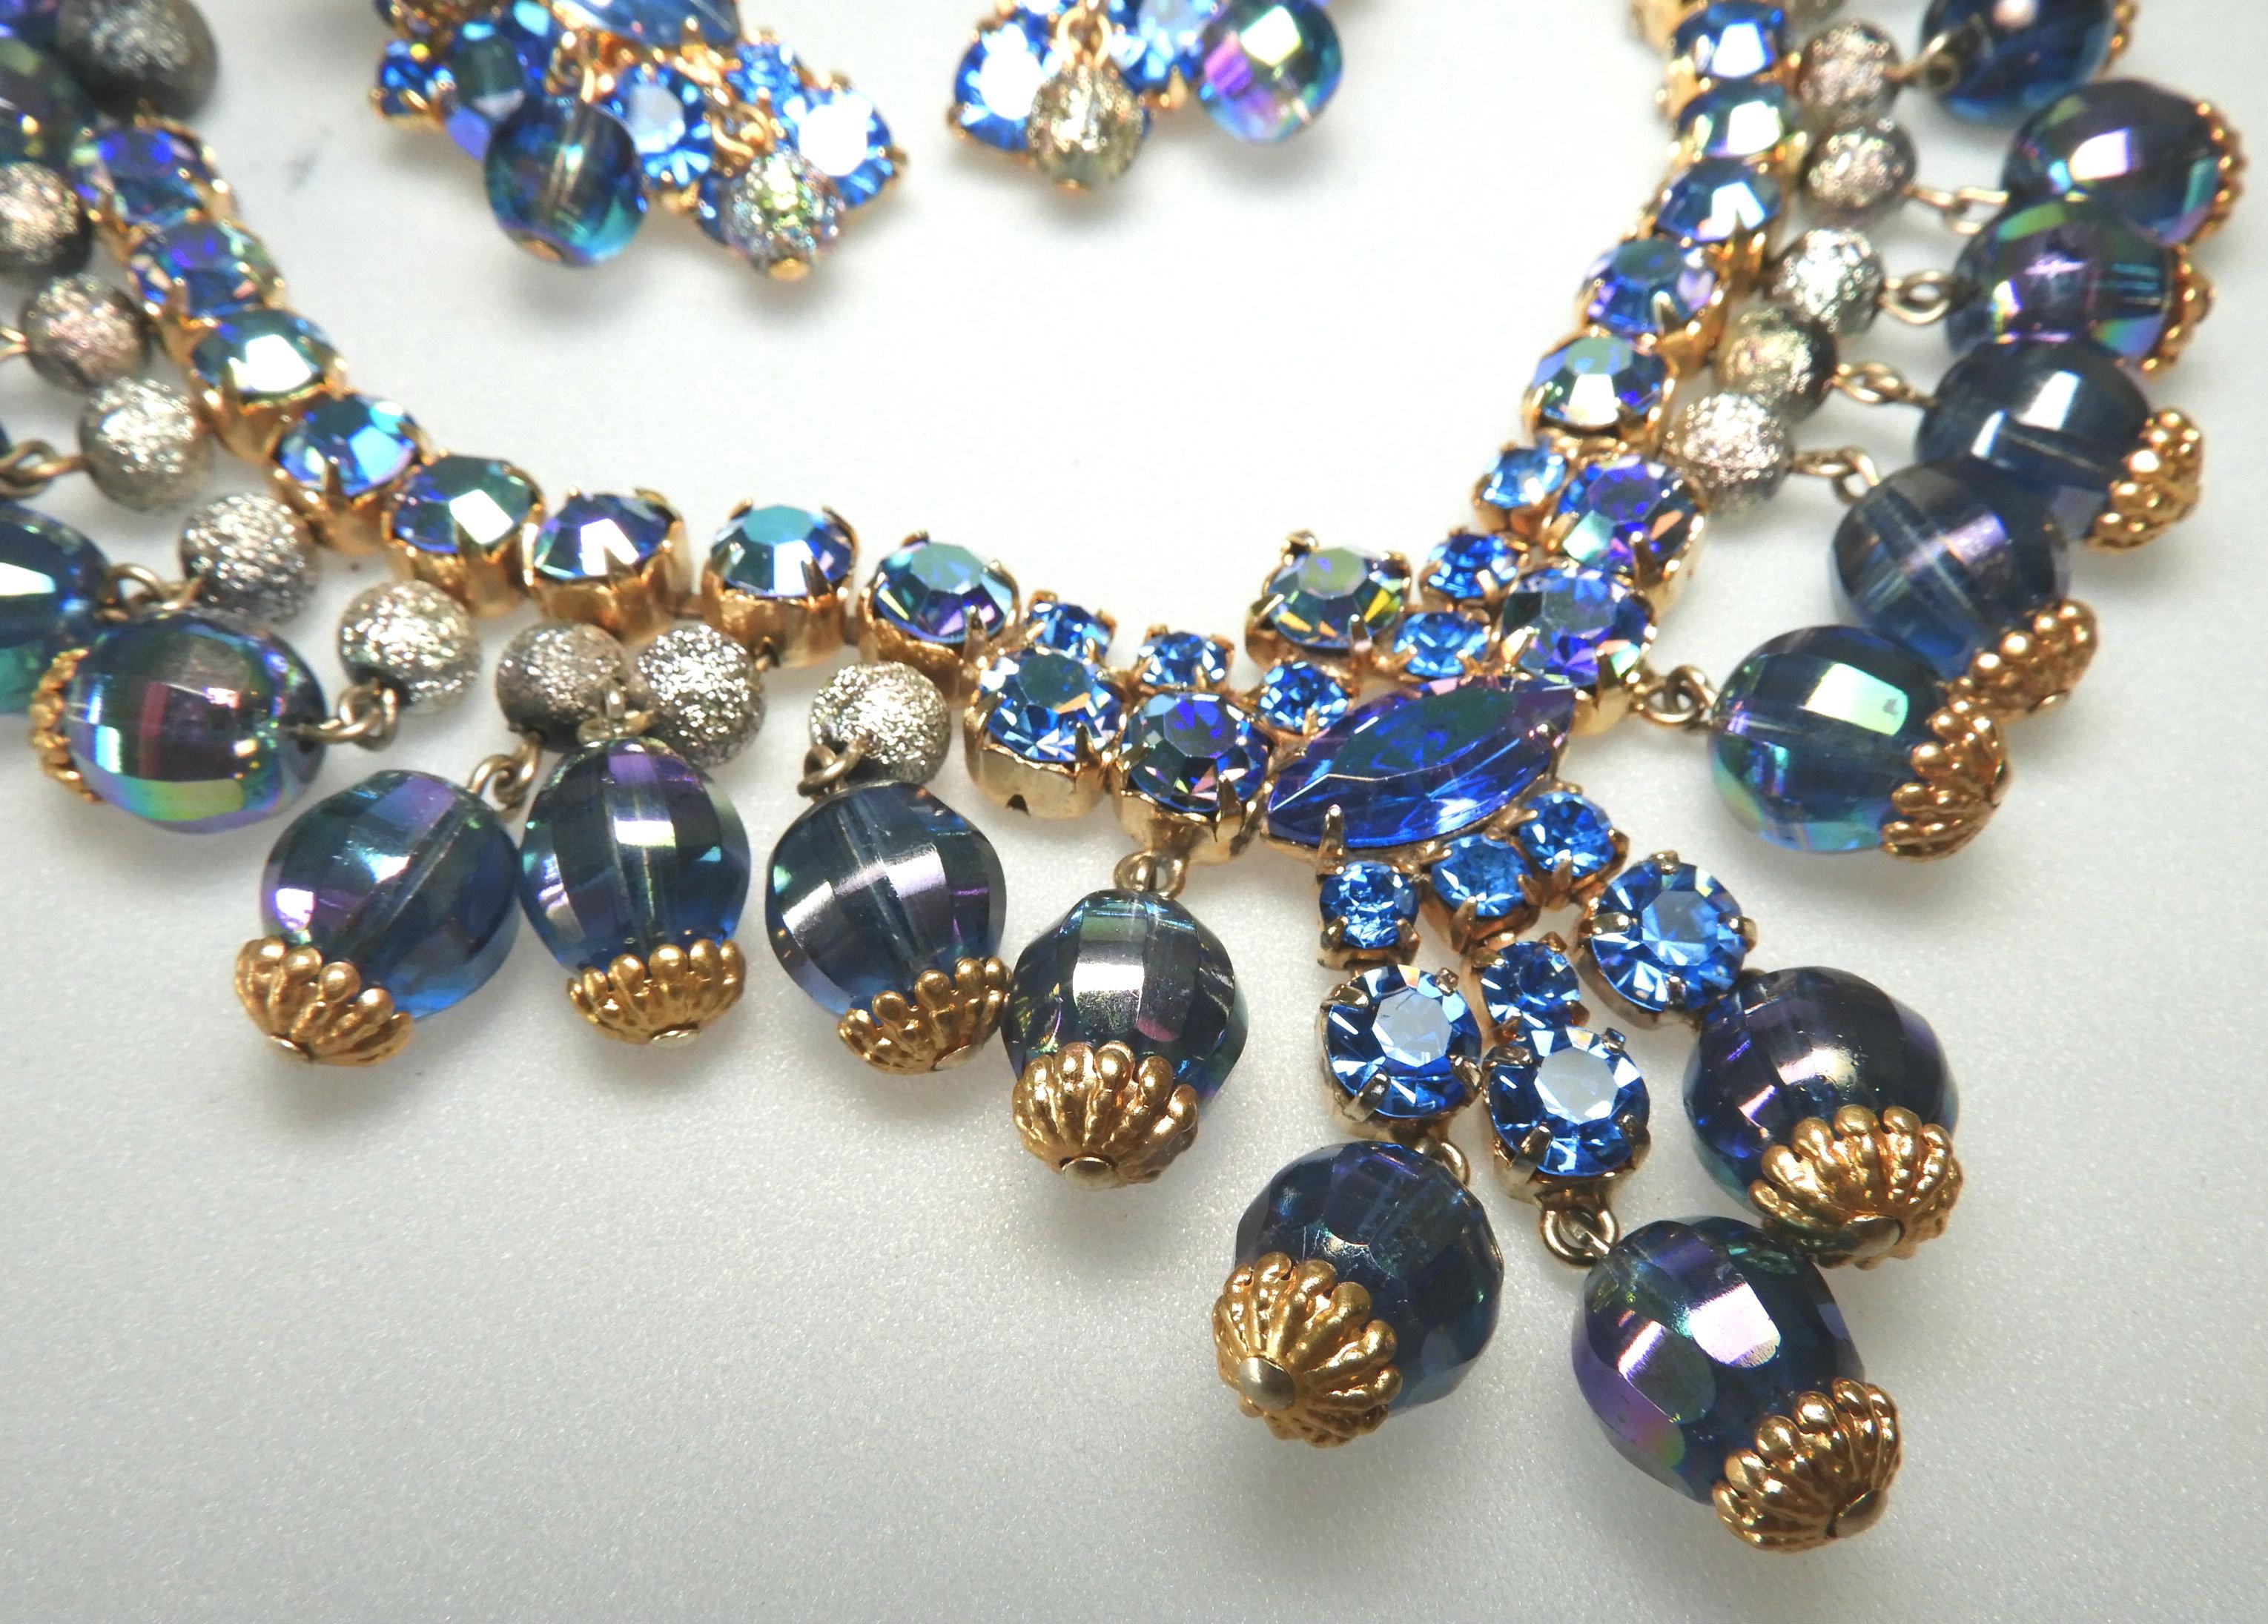 Vintage Blue Dangle Necklace and Earring Set